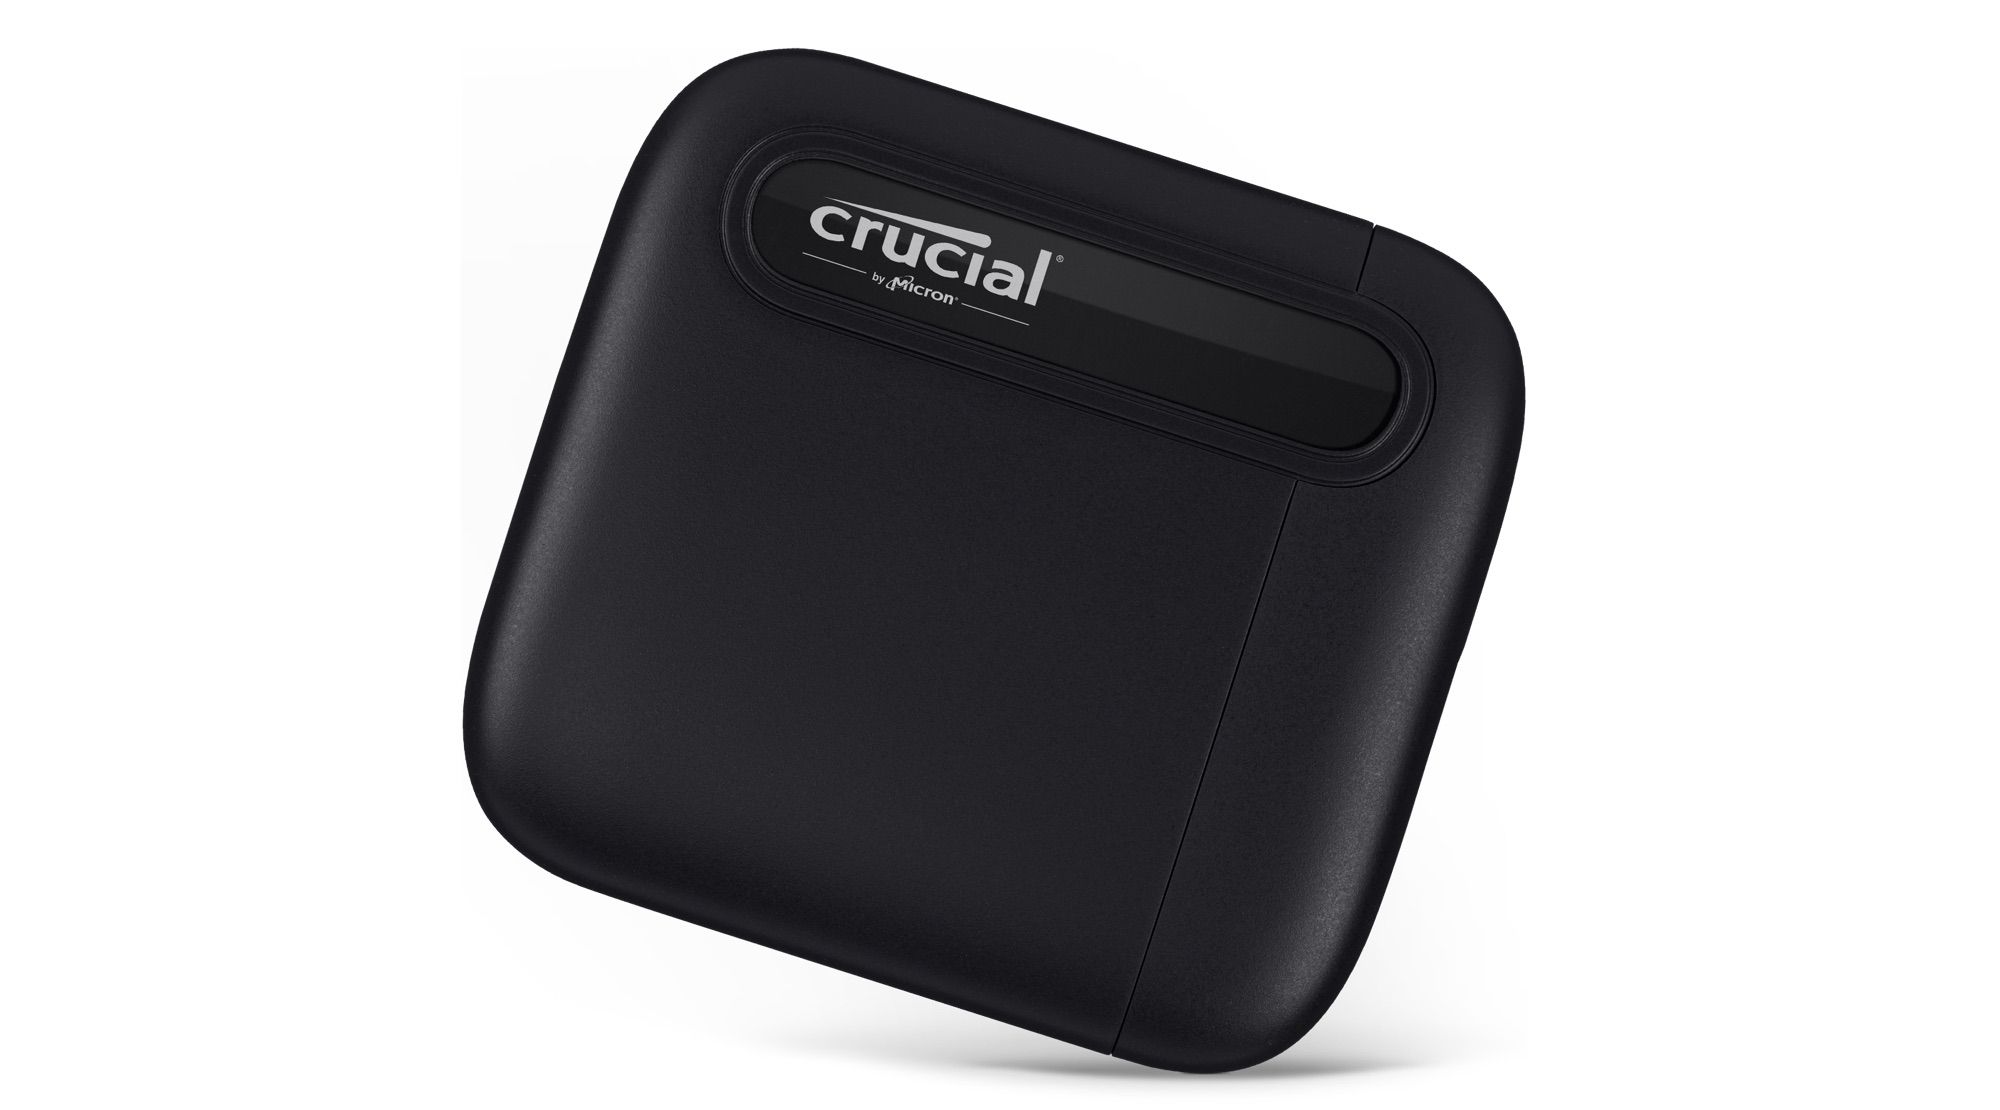 Crucial X6 Portable SSD 4TB Launches at $490: Phison's U17 Flash